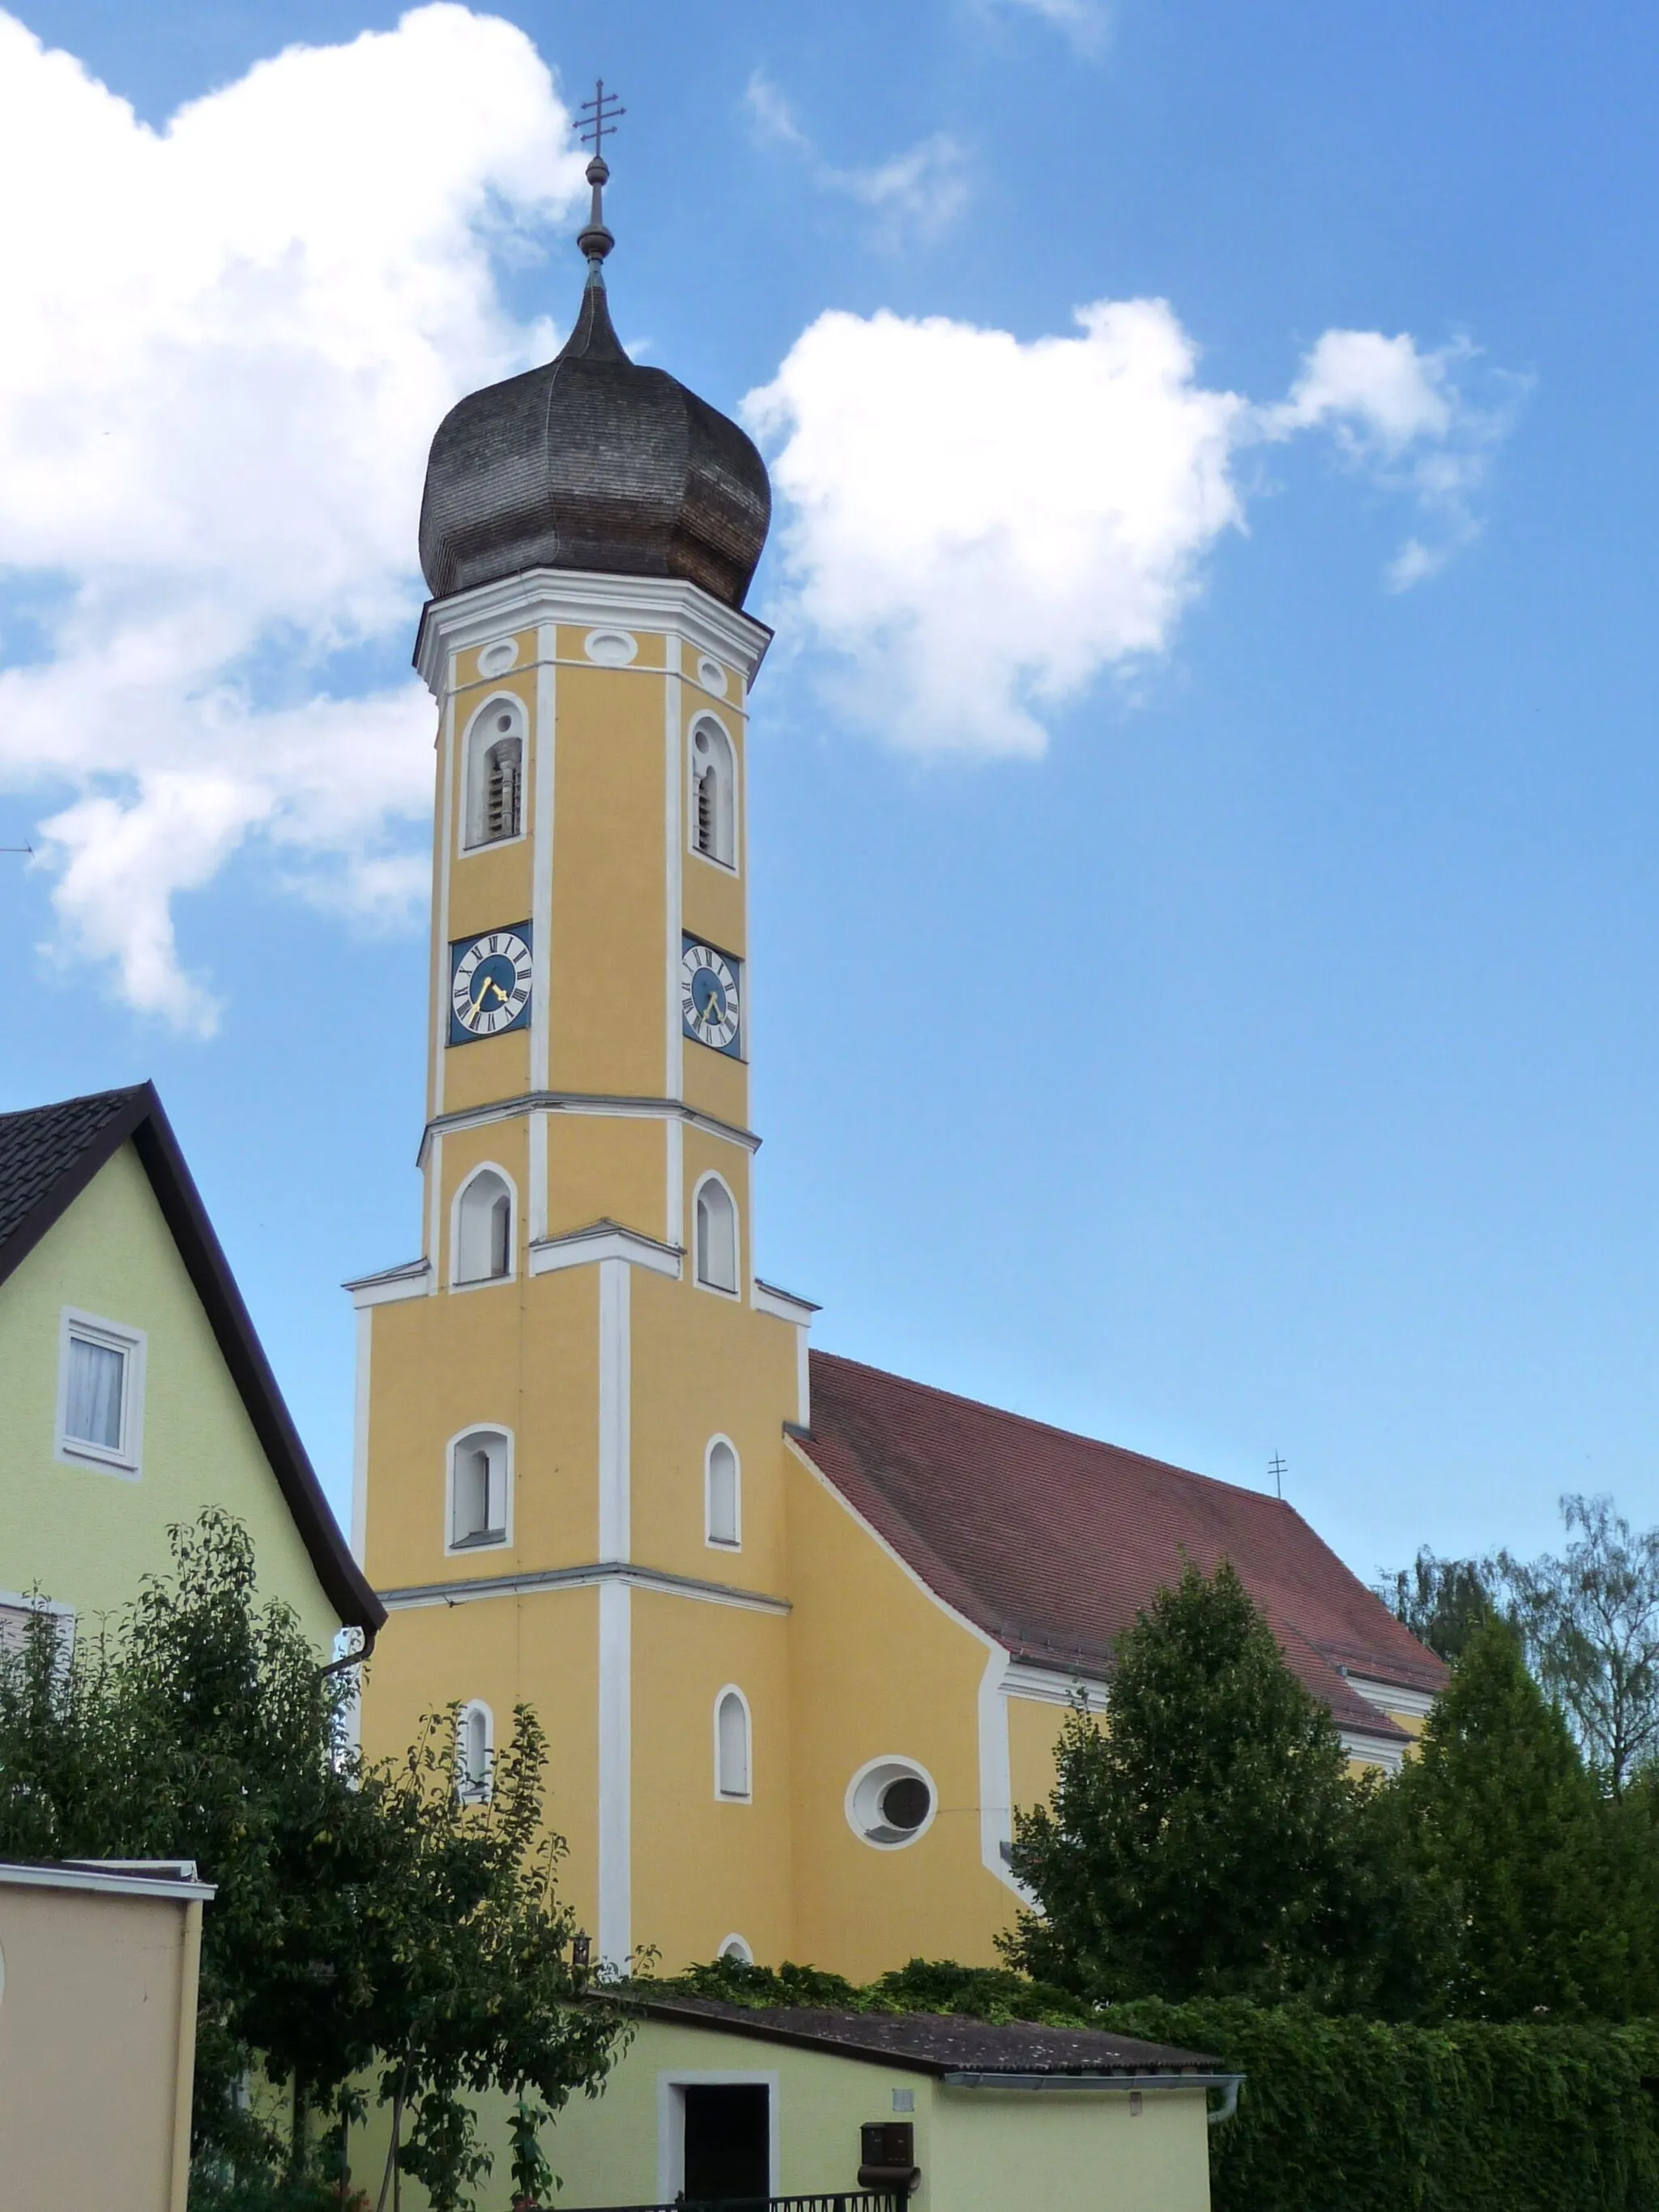 Photo showing: The Parish Church Assumption of Mary in Pfatter